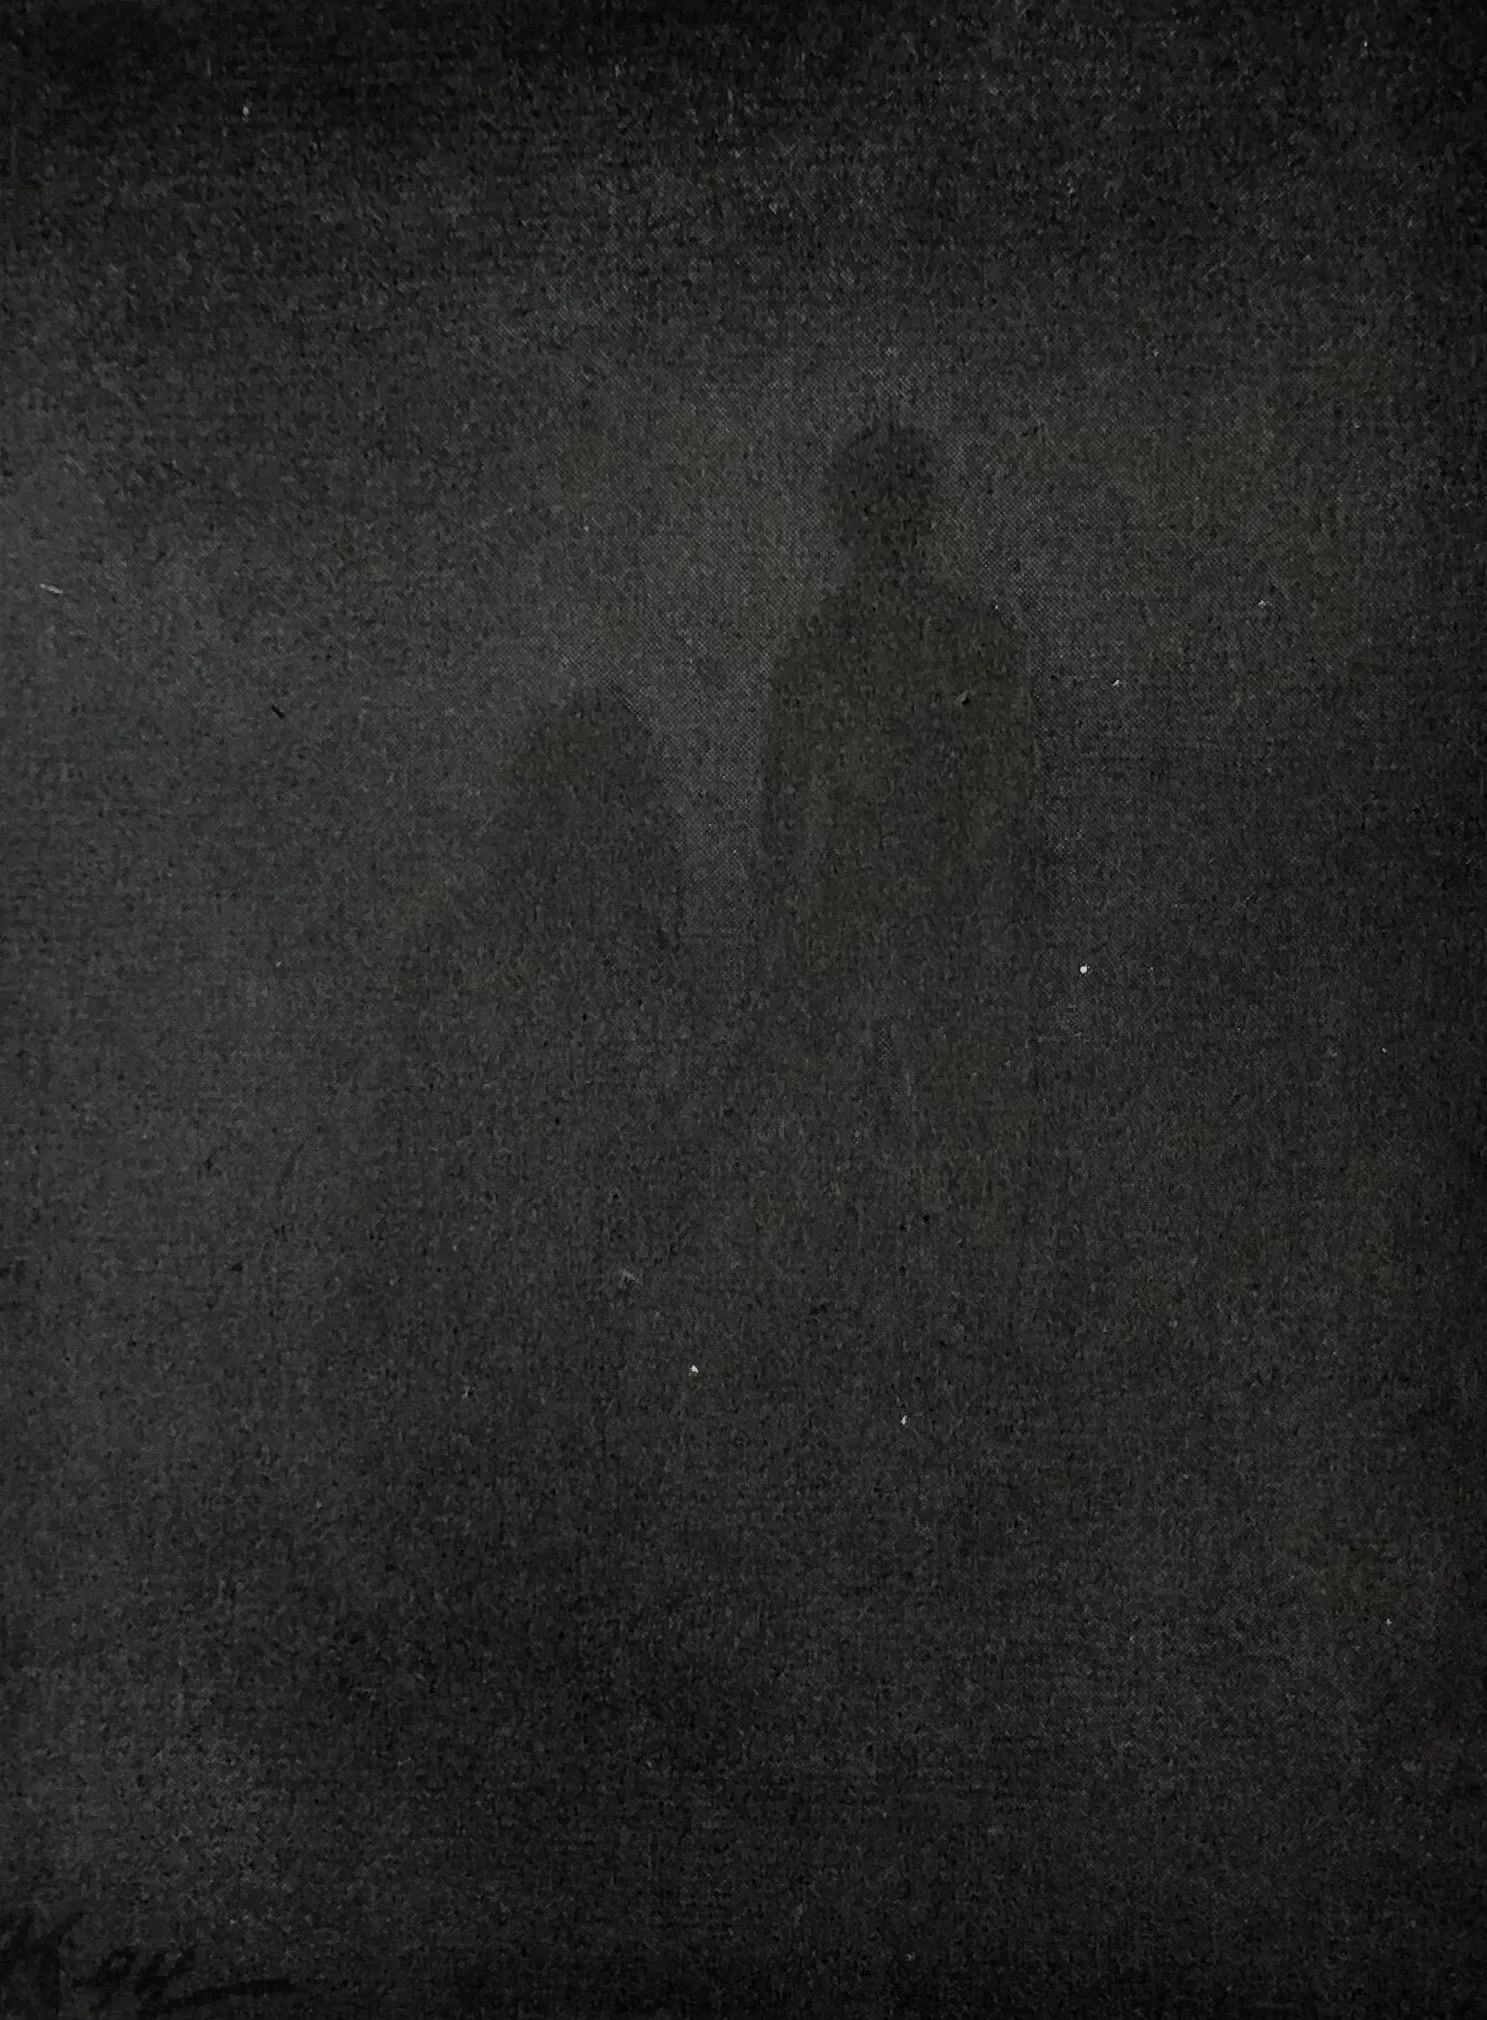 Illustration in almost all black, the vitilizing darkess, with two figures just visible